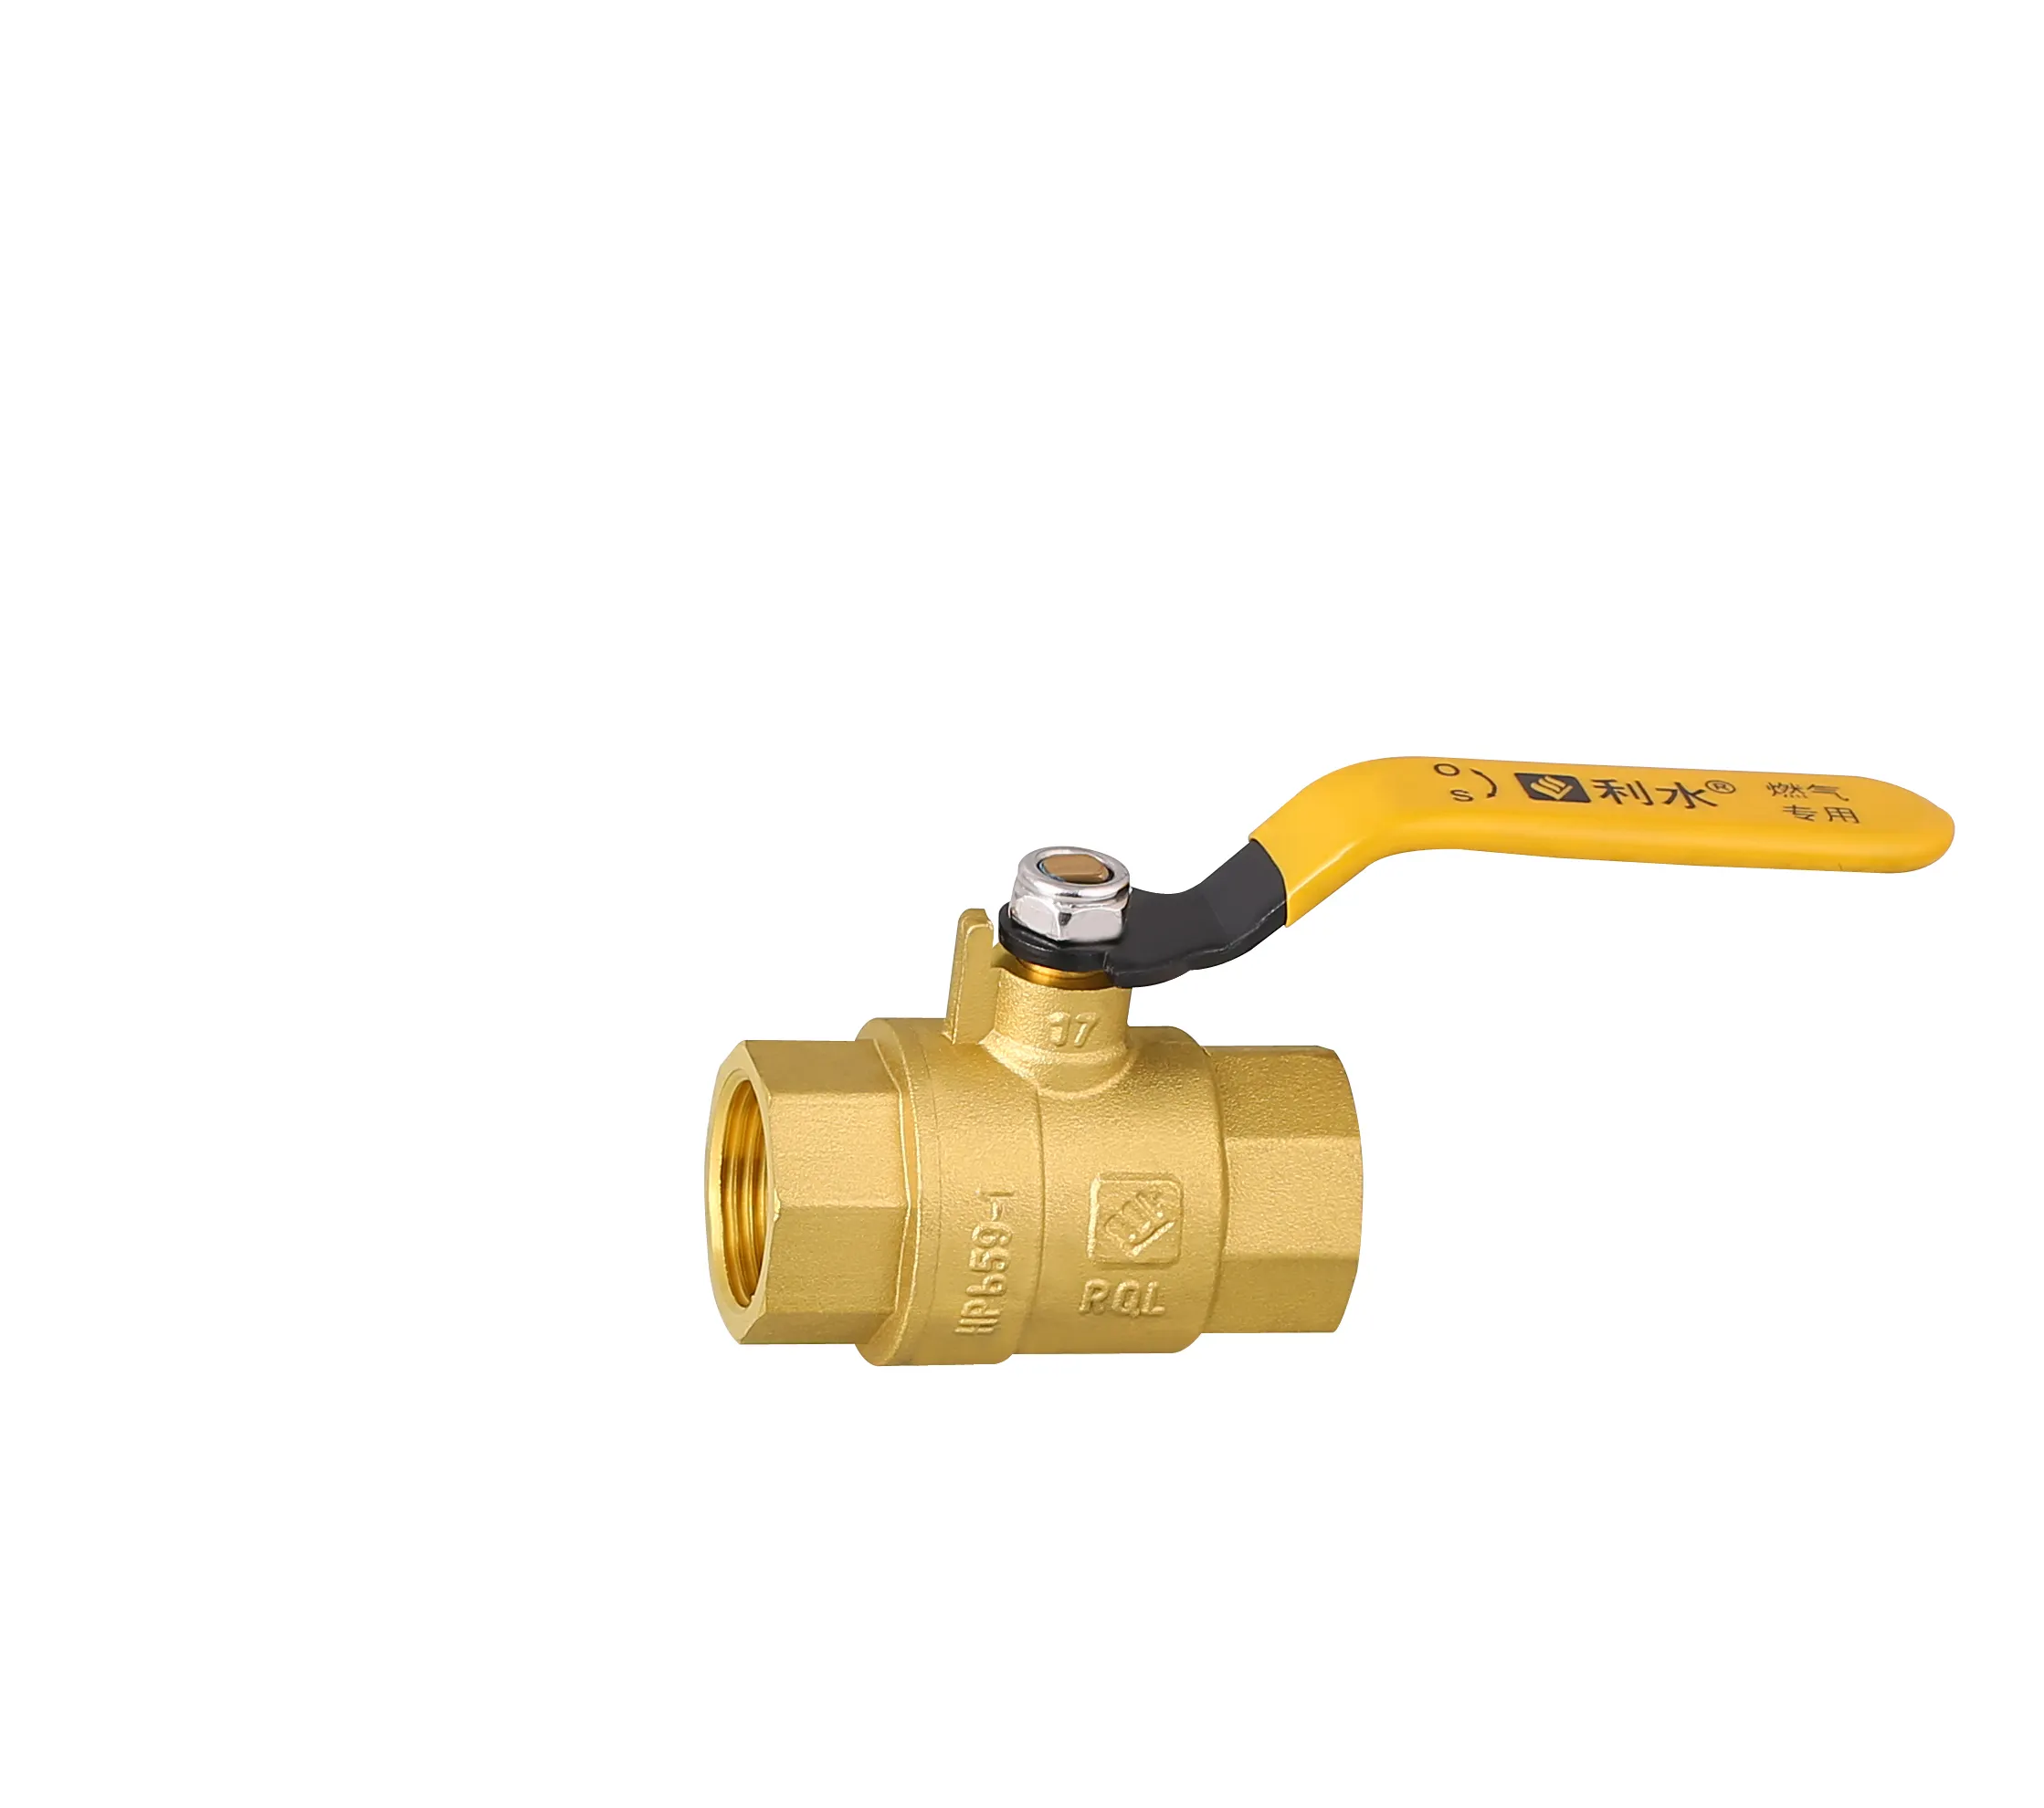 LISHUI 3/4 Inch High Quality Yellow Handle Gas Control Valve Brass Ball Valve For Gas Gas Valve